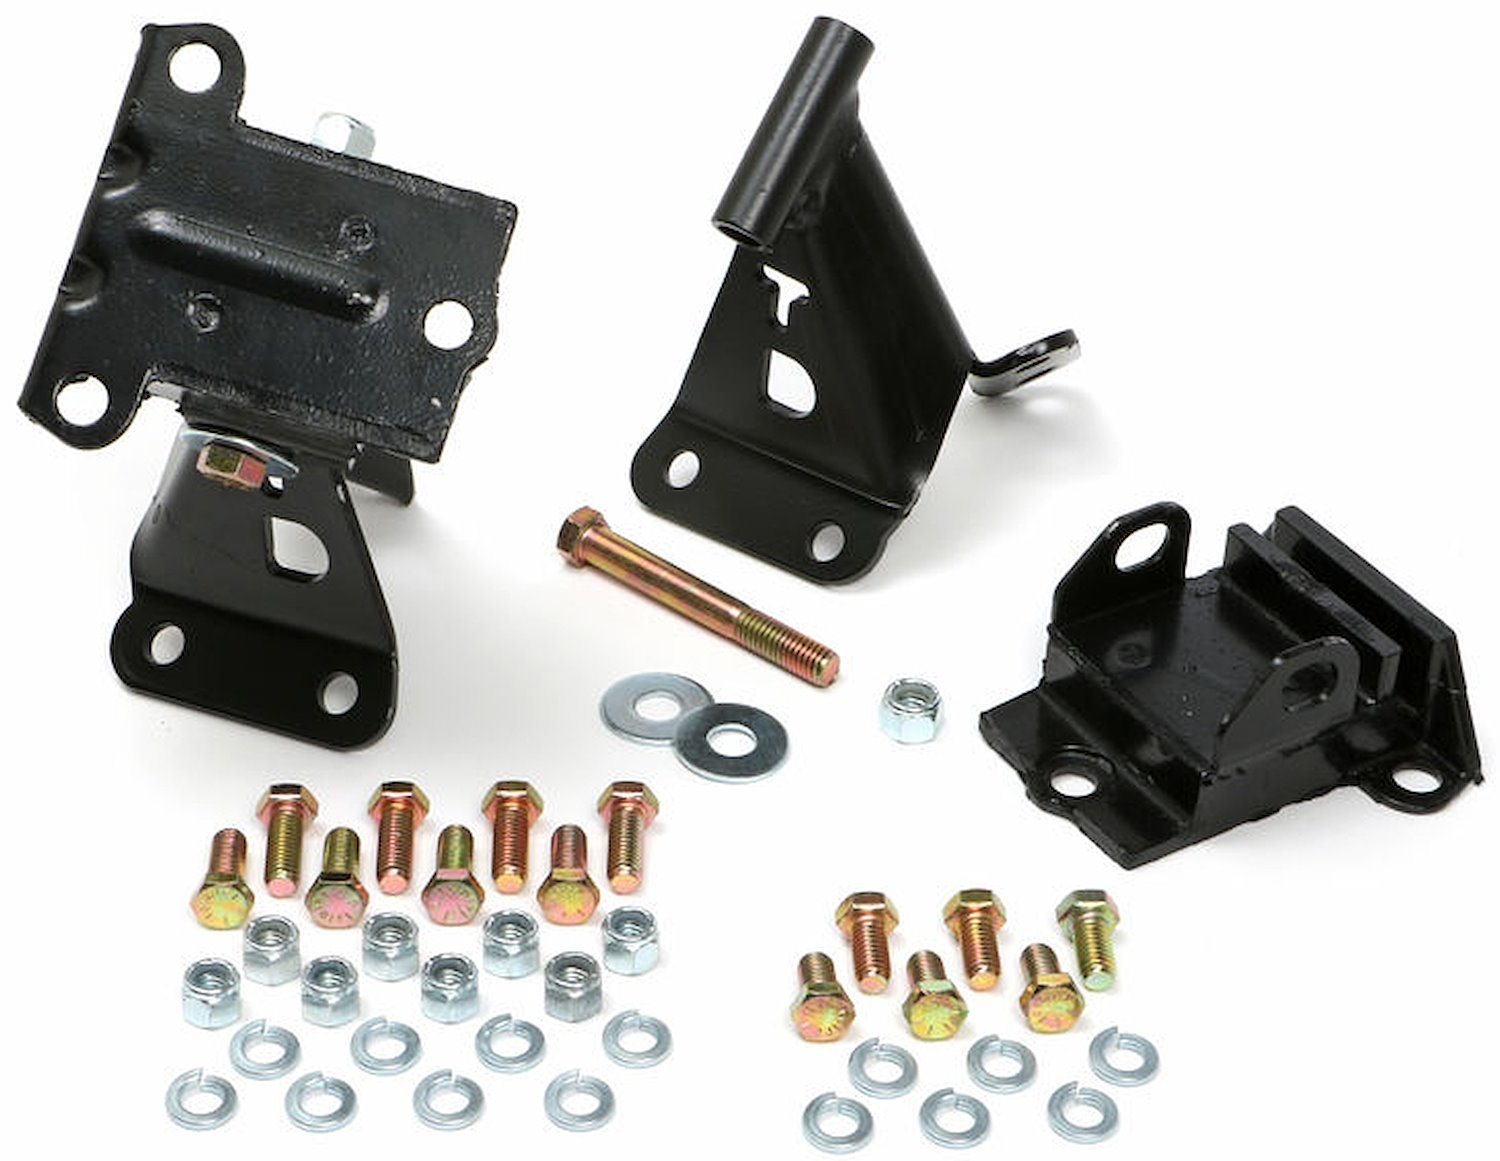 Engine Swap Motor Mount Kit Small Block Chevy 283-400 or 4.3L V6 into 1955-57 (Tri-5) Chevy 150, 210, Belair, Nomad